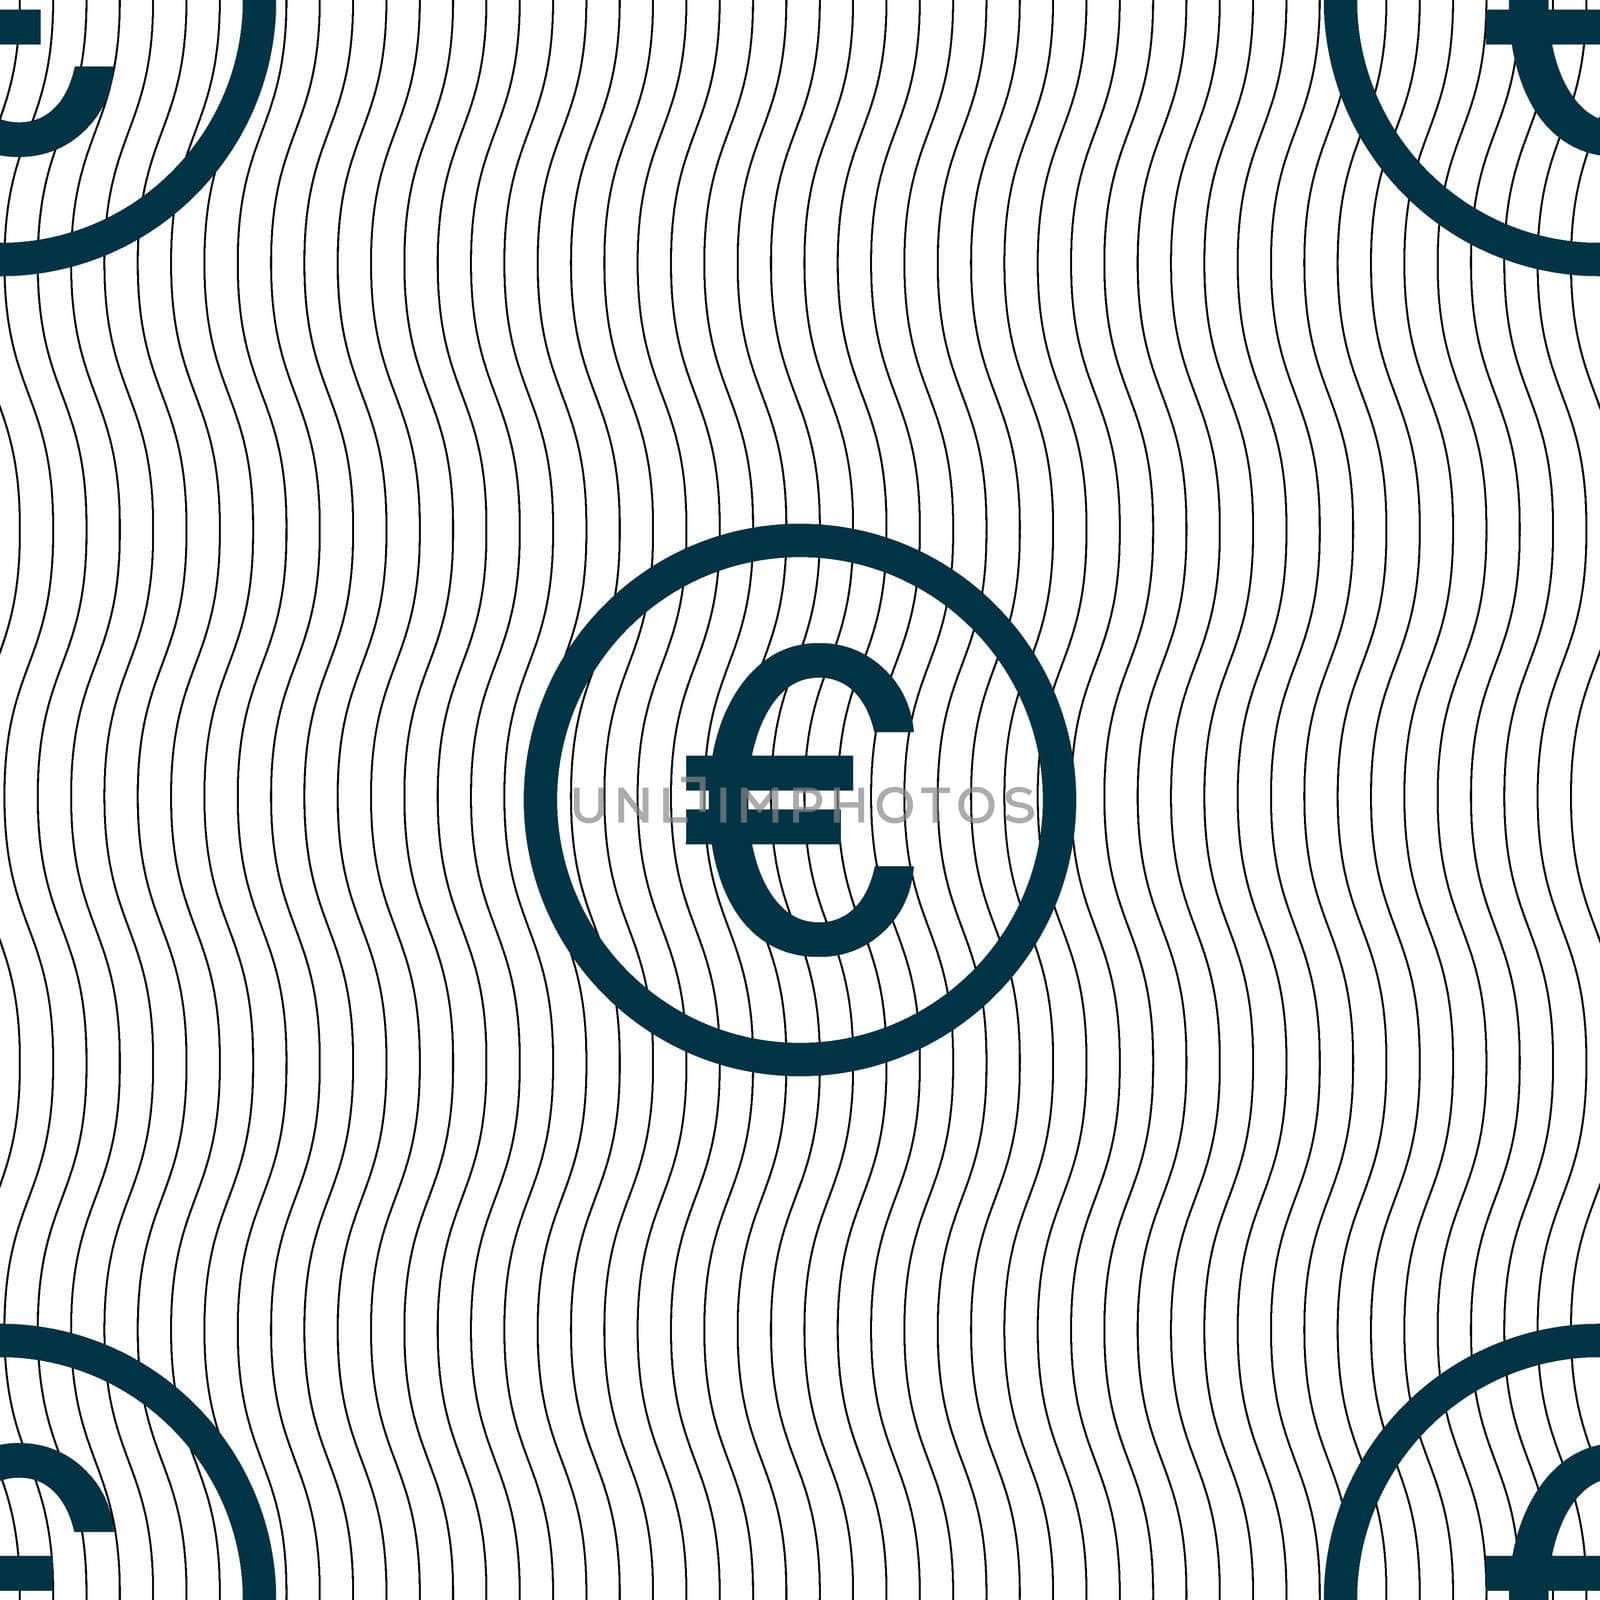 Euro icon sign. Seamless pattern with geometric texture. illustration